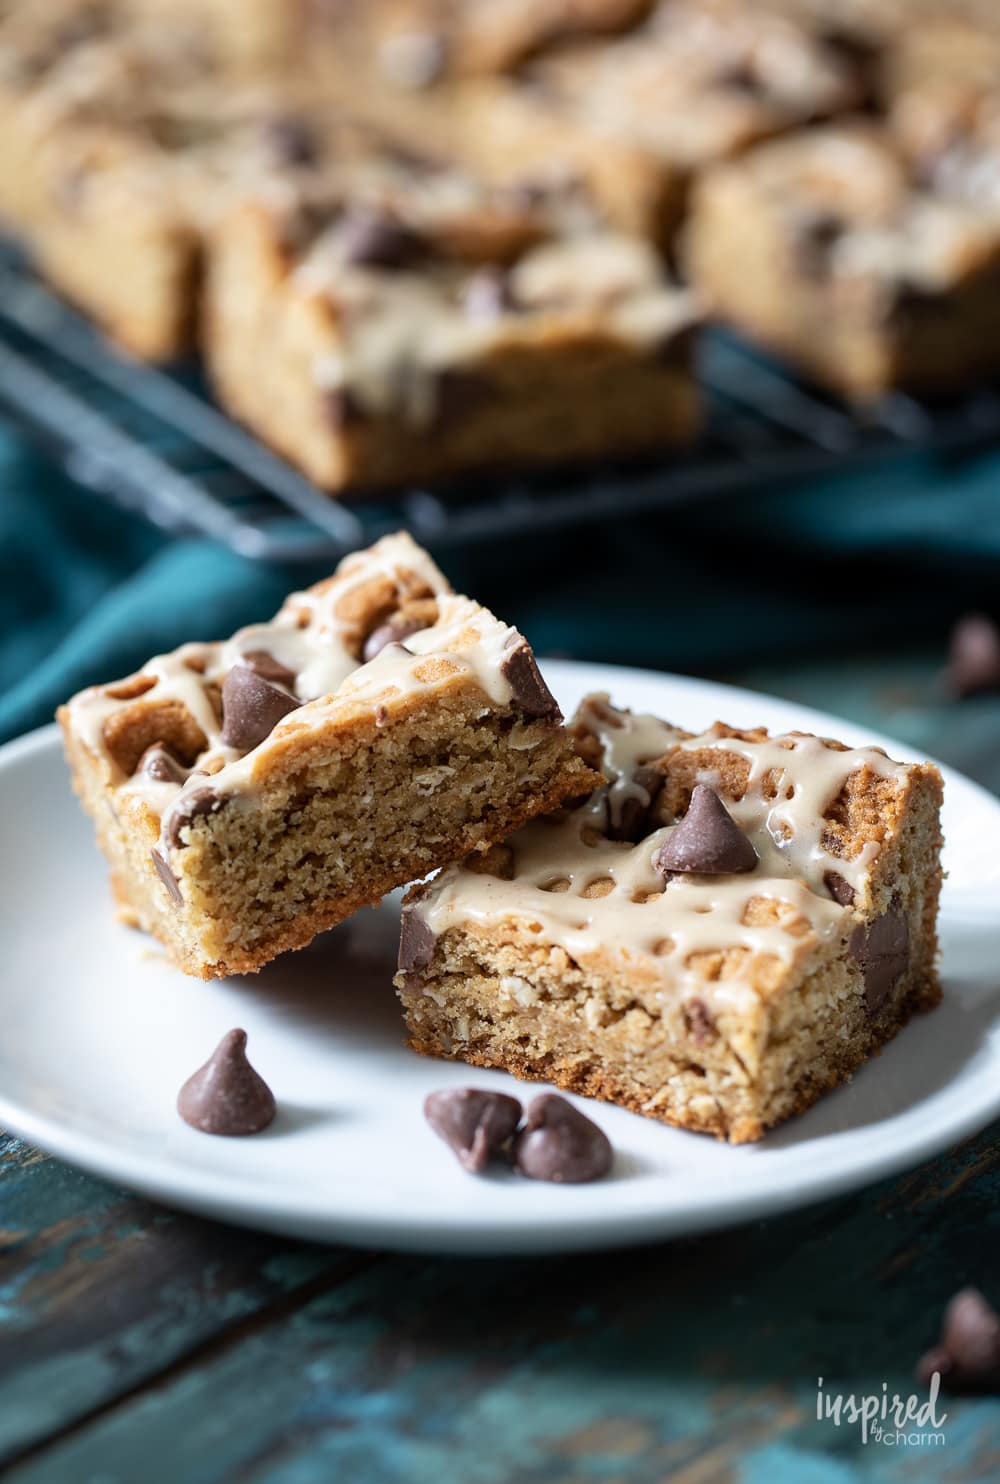 Chocolate Chip Peanut Butter Bars on a white plate with some chocolate chips.